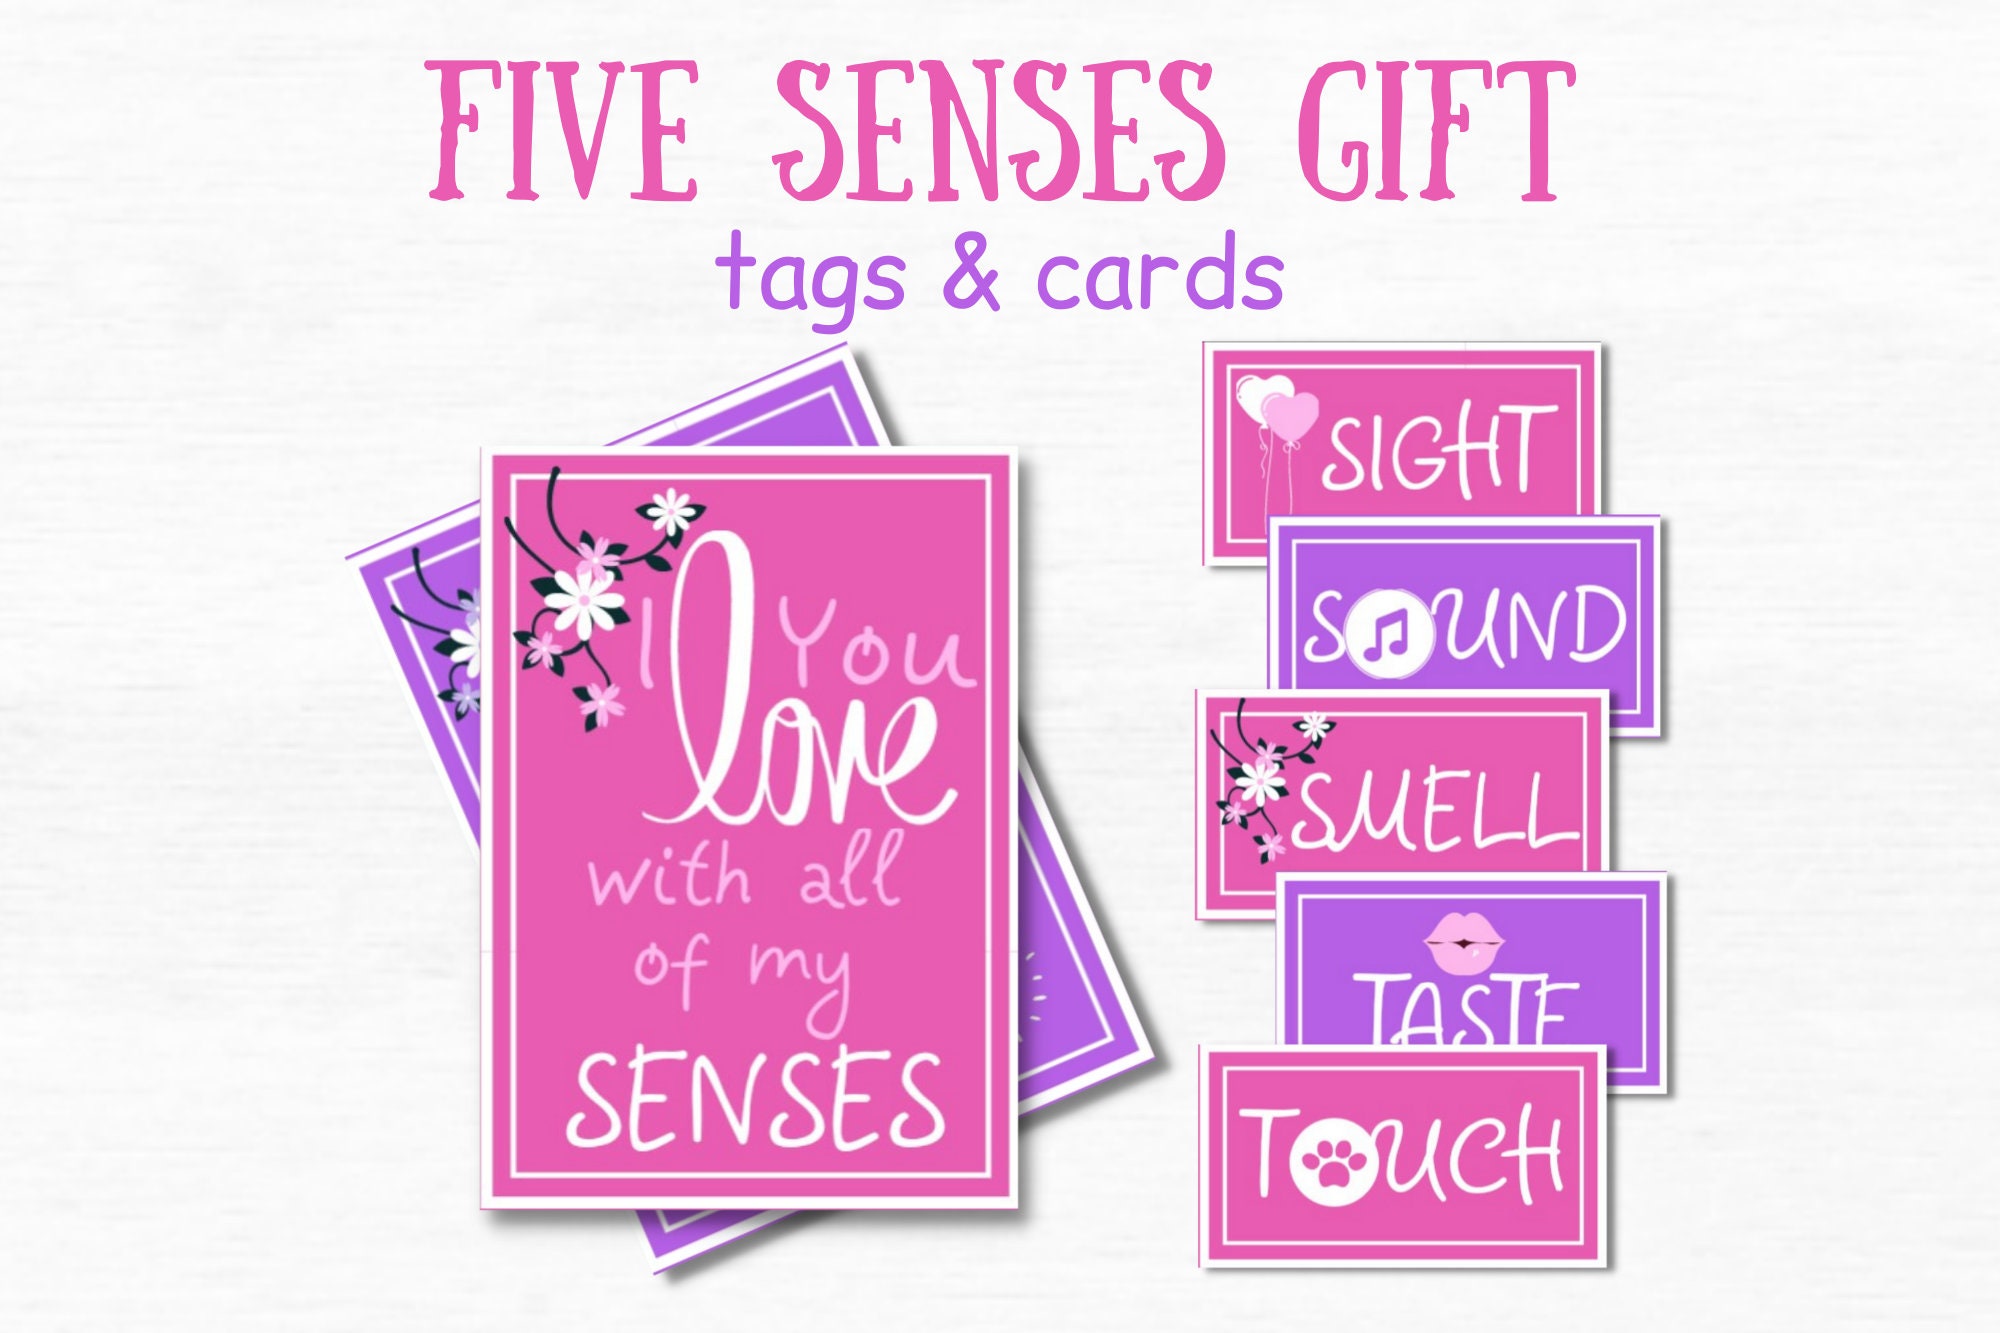 Thoughtful 5 Senses Gift Ideas for Someone Special - Anynee